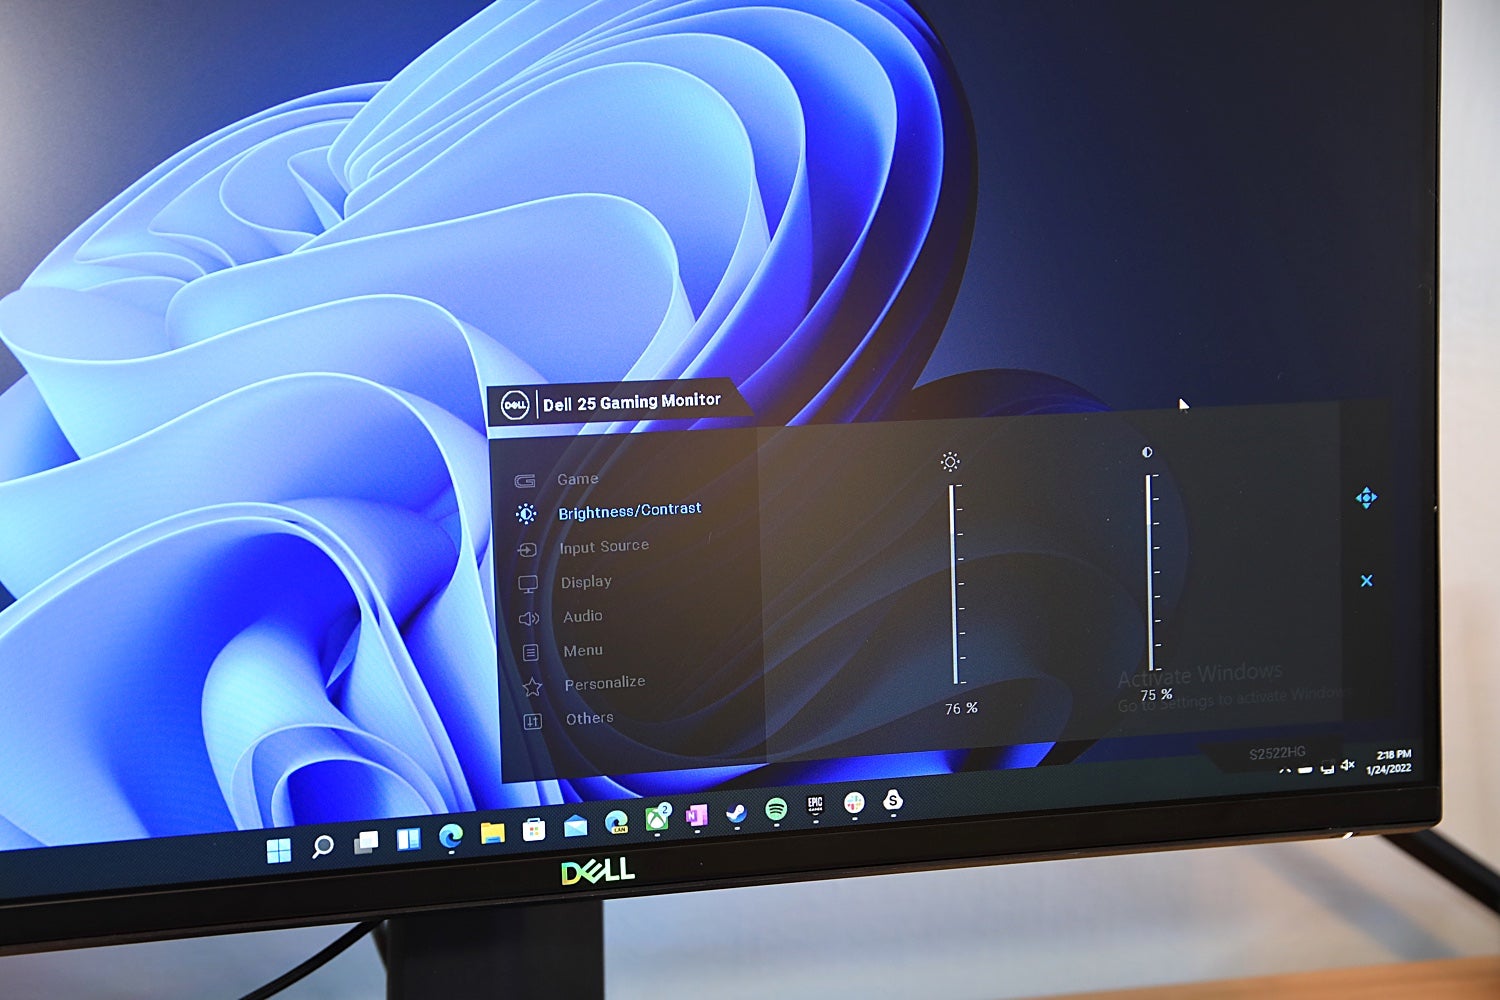 How To Change Brightness On A Dell Monitor